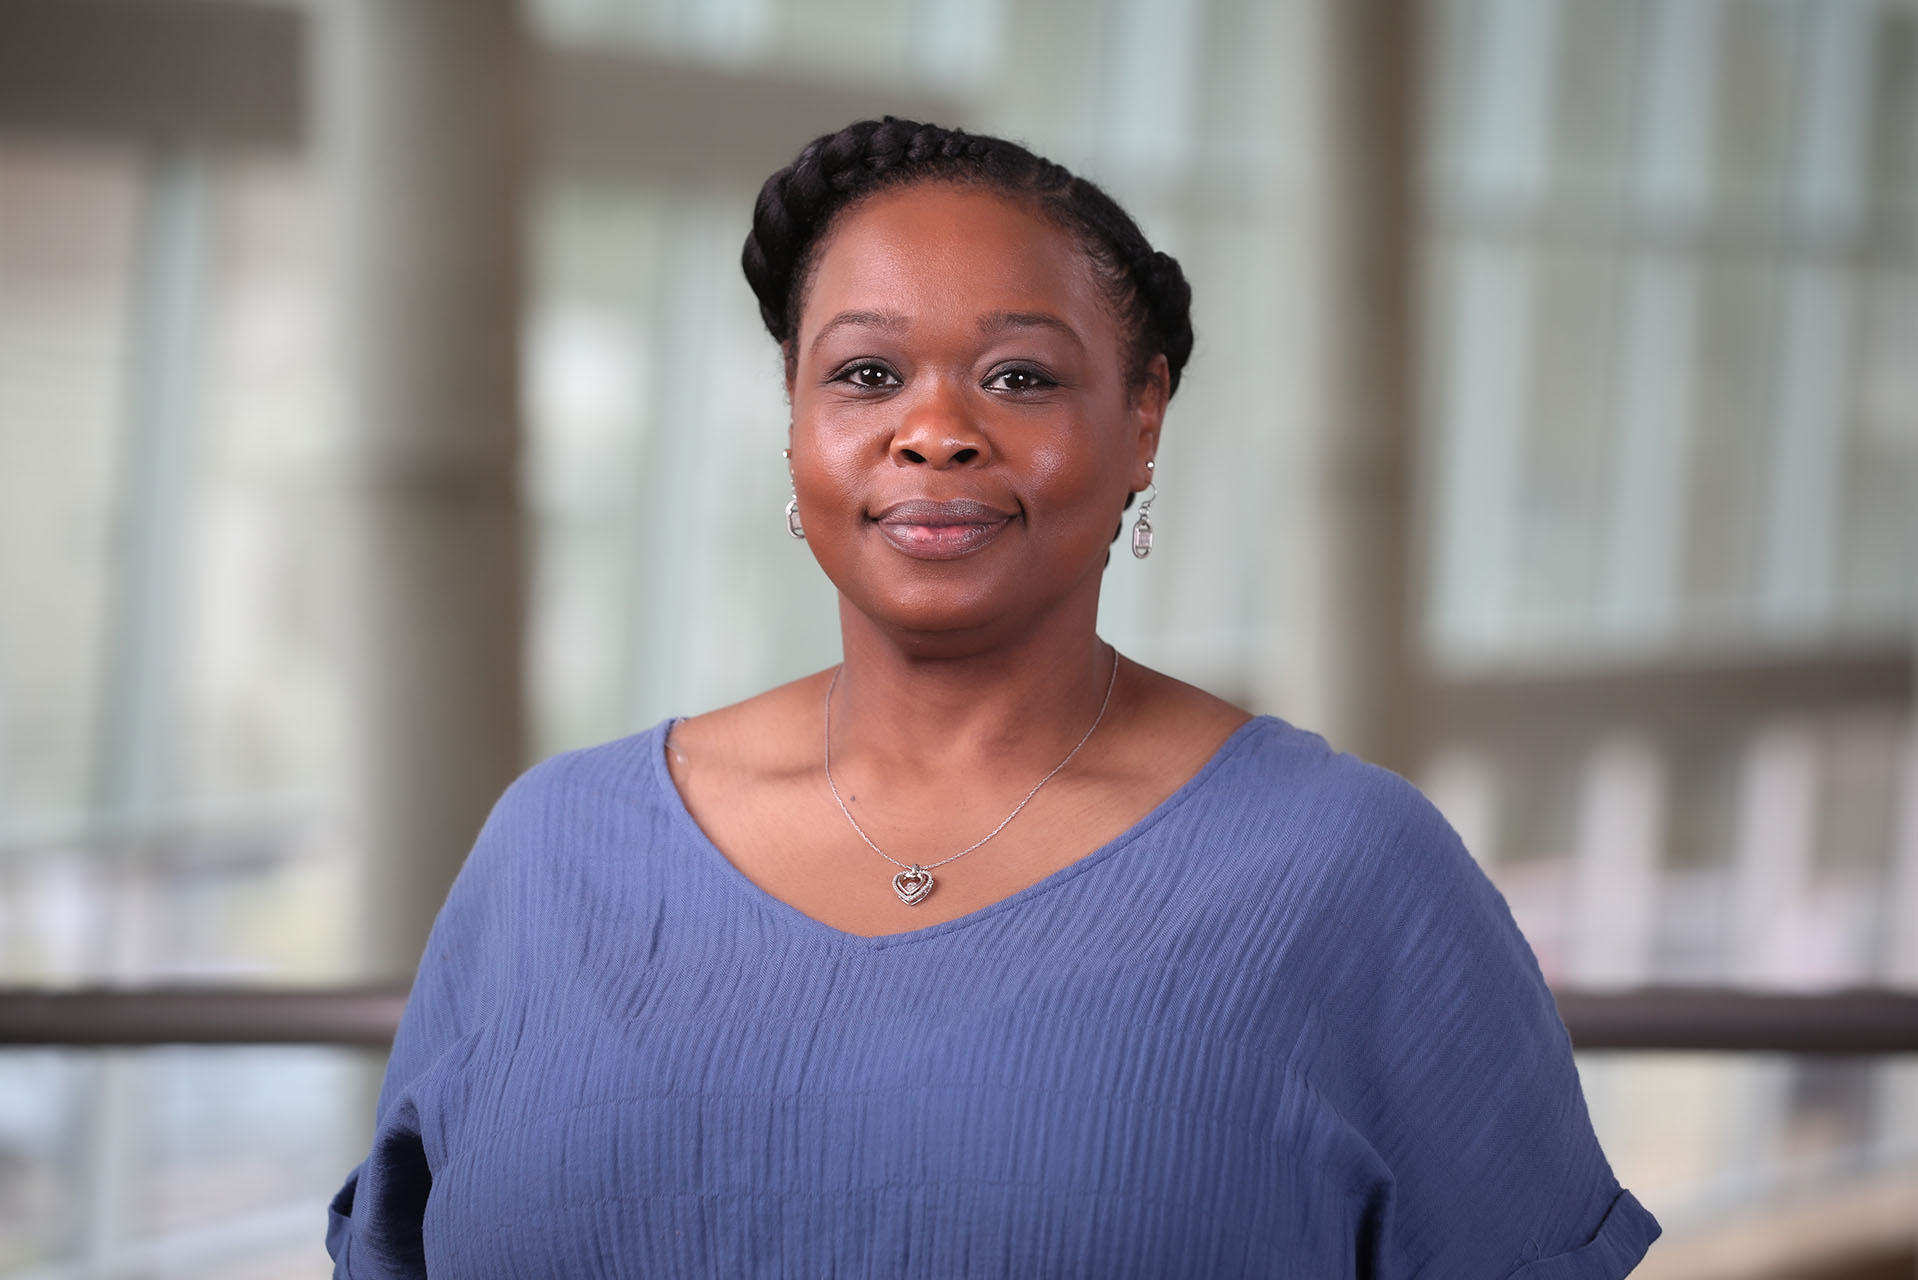 The Munroe-Meyer Institute&apos;s Jacqueline Hankins Barry received the med center&apos;s inaugural Unsung Hero Award&period;